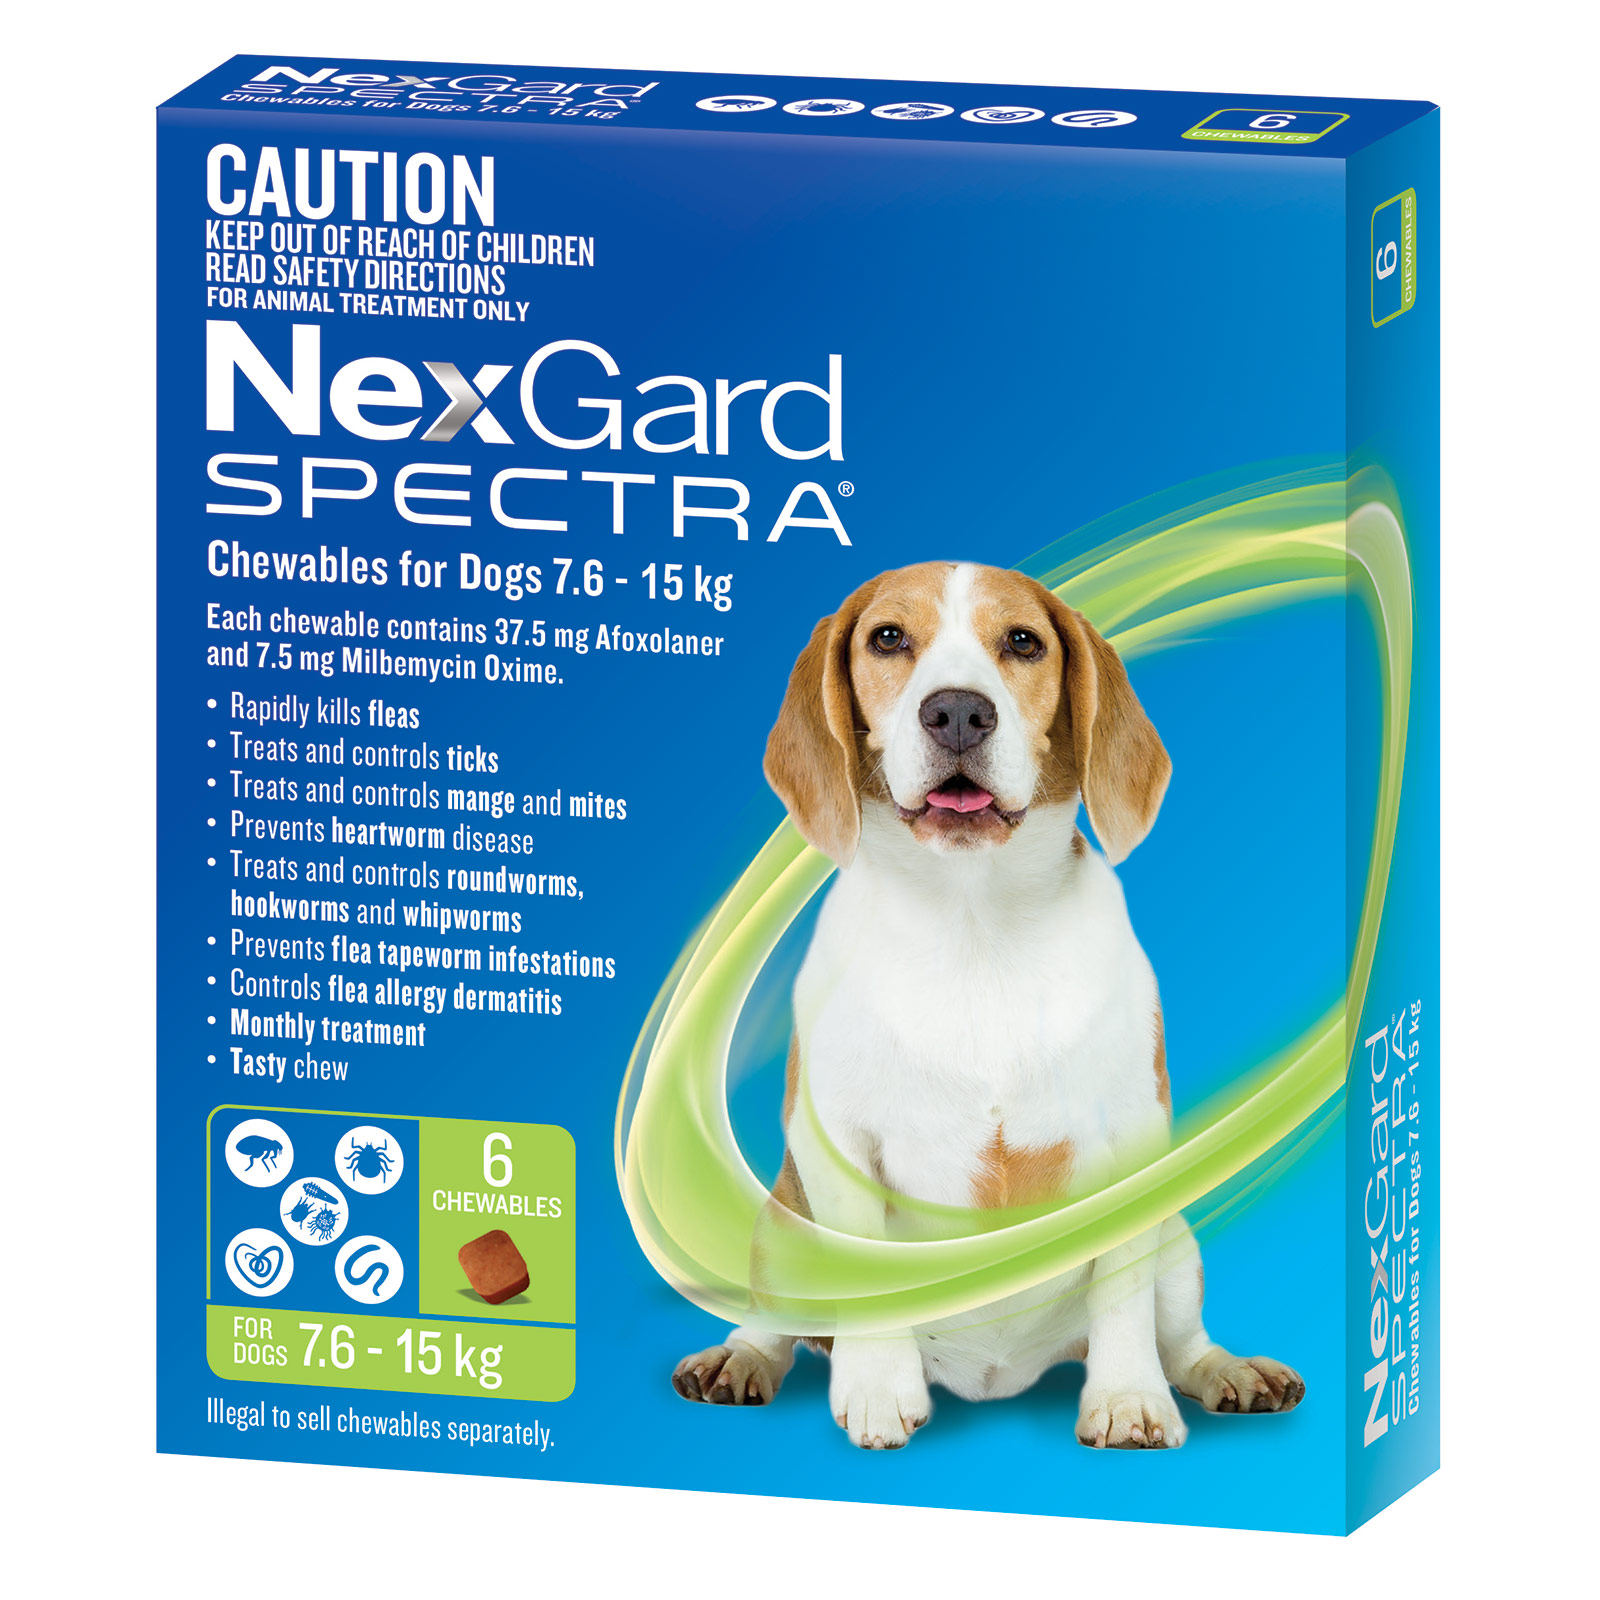 Take Further 10% Off NexGard Spectra with discount code